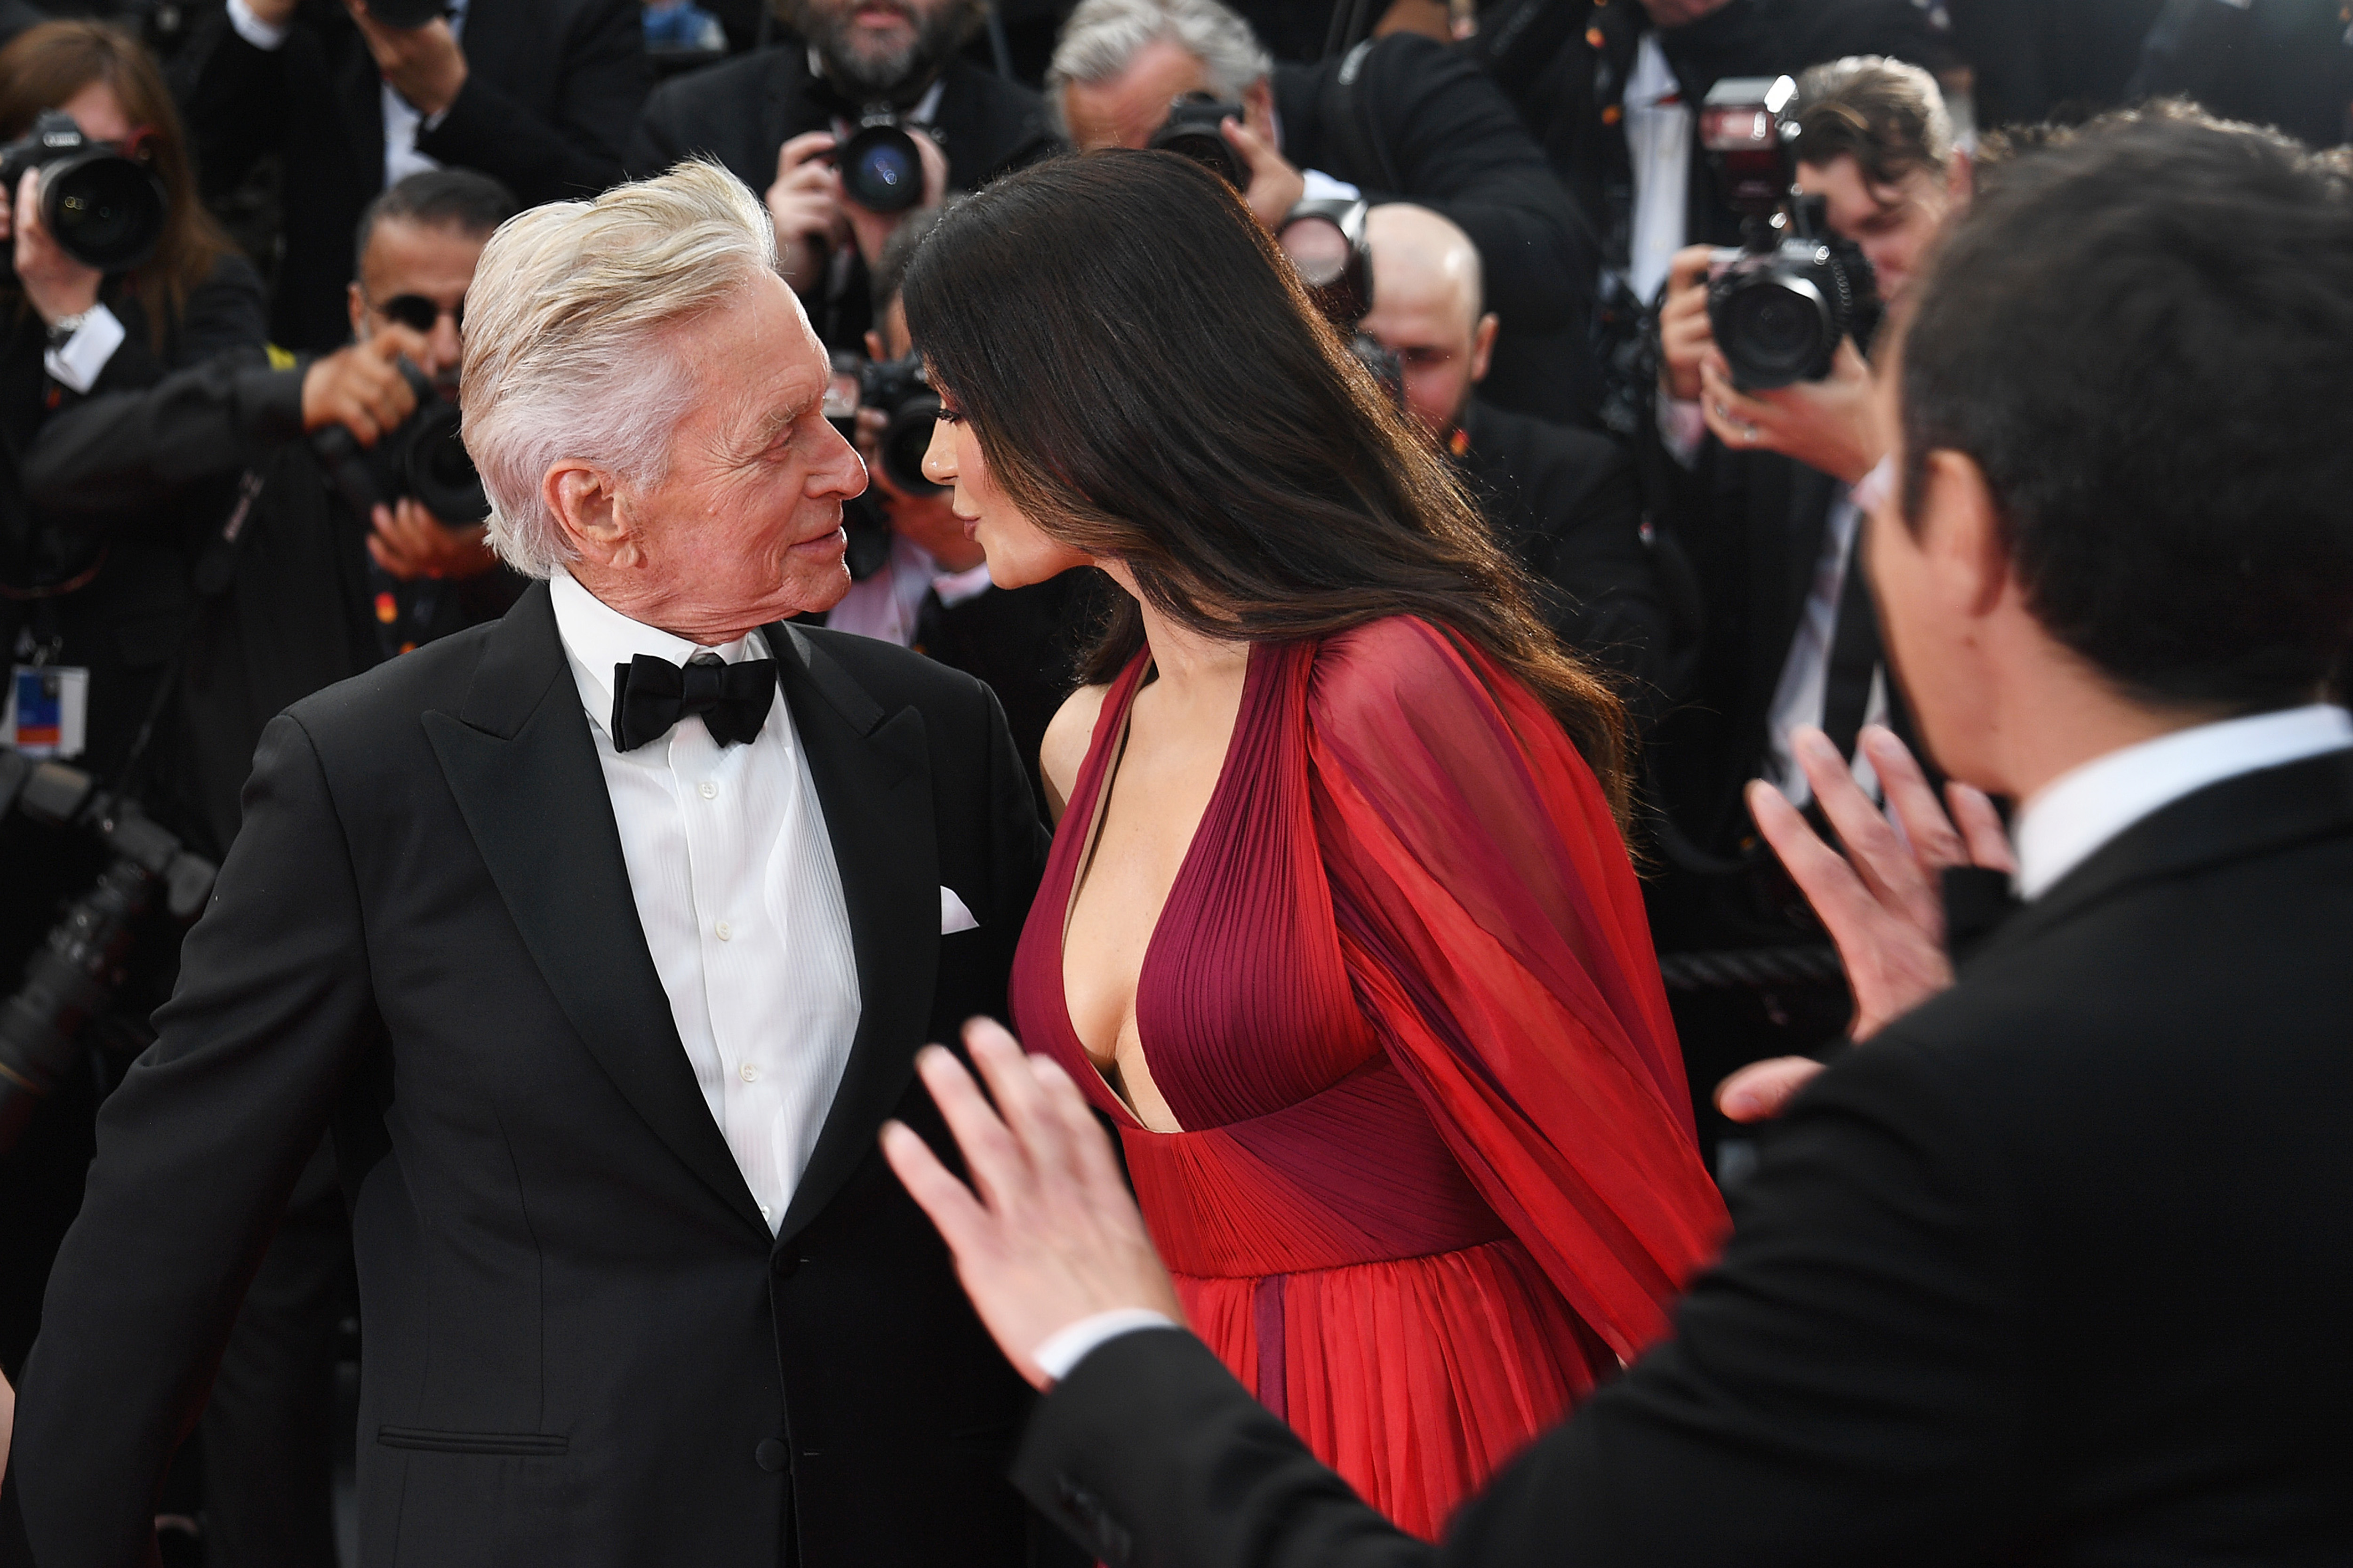 Michael Douglas and Catherine Zeta-Jones in Cannes, France in 2023 | Source: Getty Images